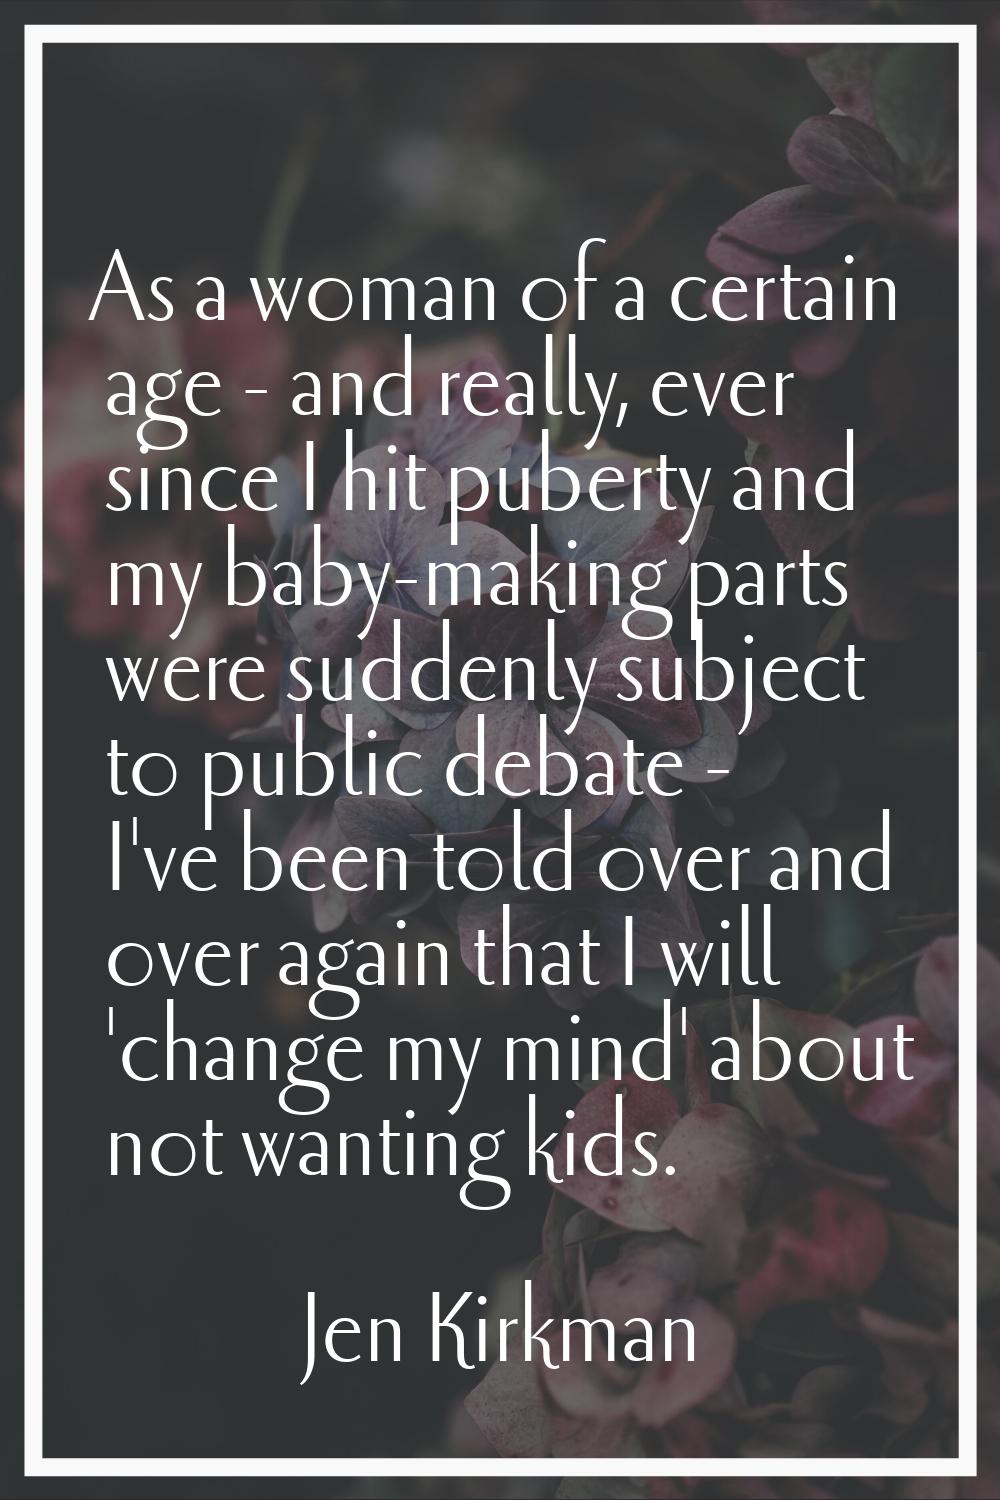 As a woman of a certain age - and really, ever since I hit puberty and my baby-making parts were su